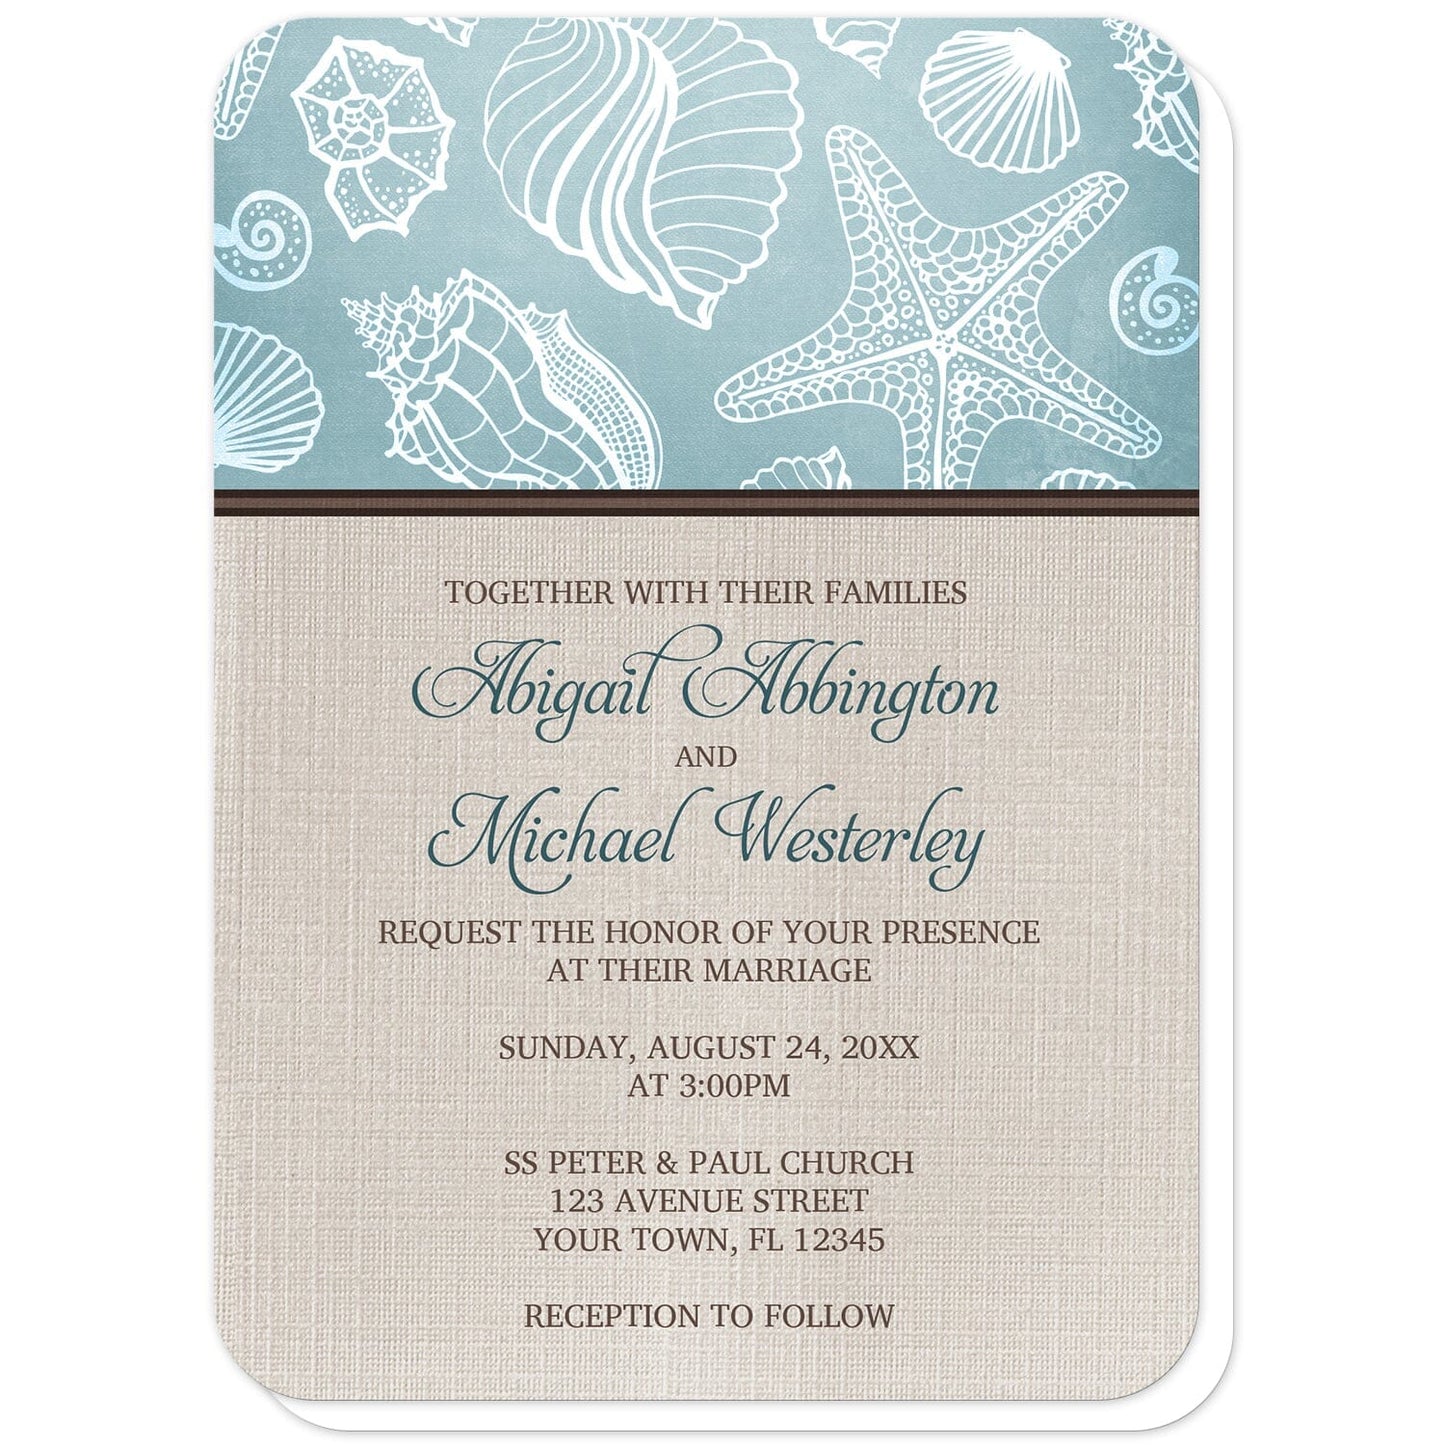 Rustic Beach Linen Wedding Invitations (with rounded corners) at Artistically Invited. Rustic beach linen wedding invitations with a white line seashell pattern over a beachy turquoise background along the top. Your personalized marriage celebration details are custom printed in dark turquoise and brown over a beige canvas background design below the seashell pattern.